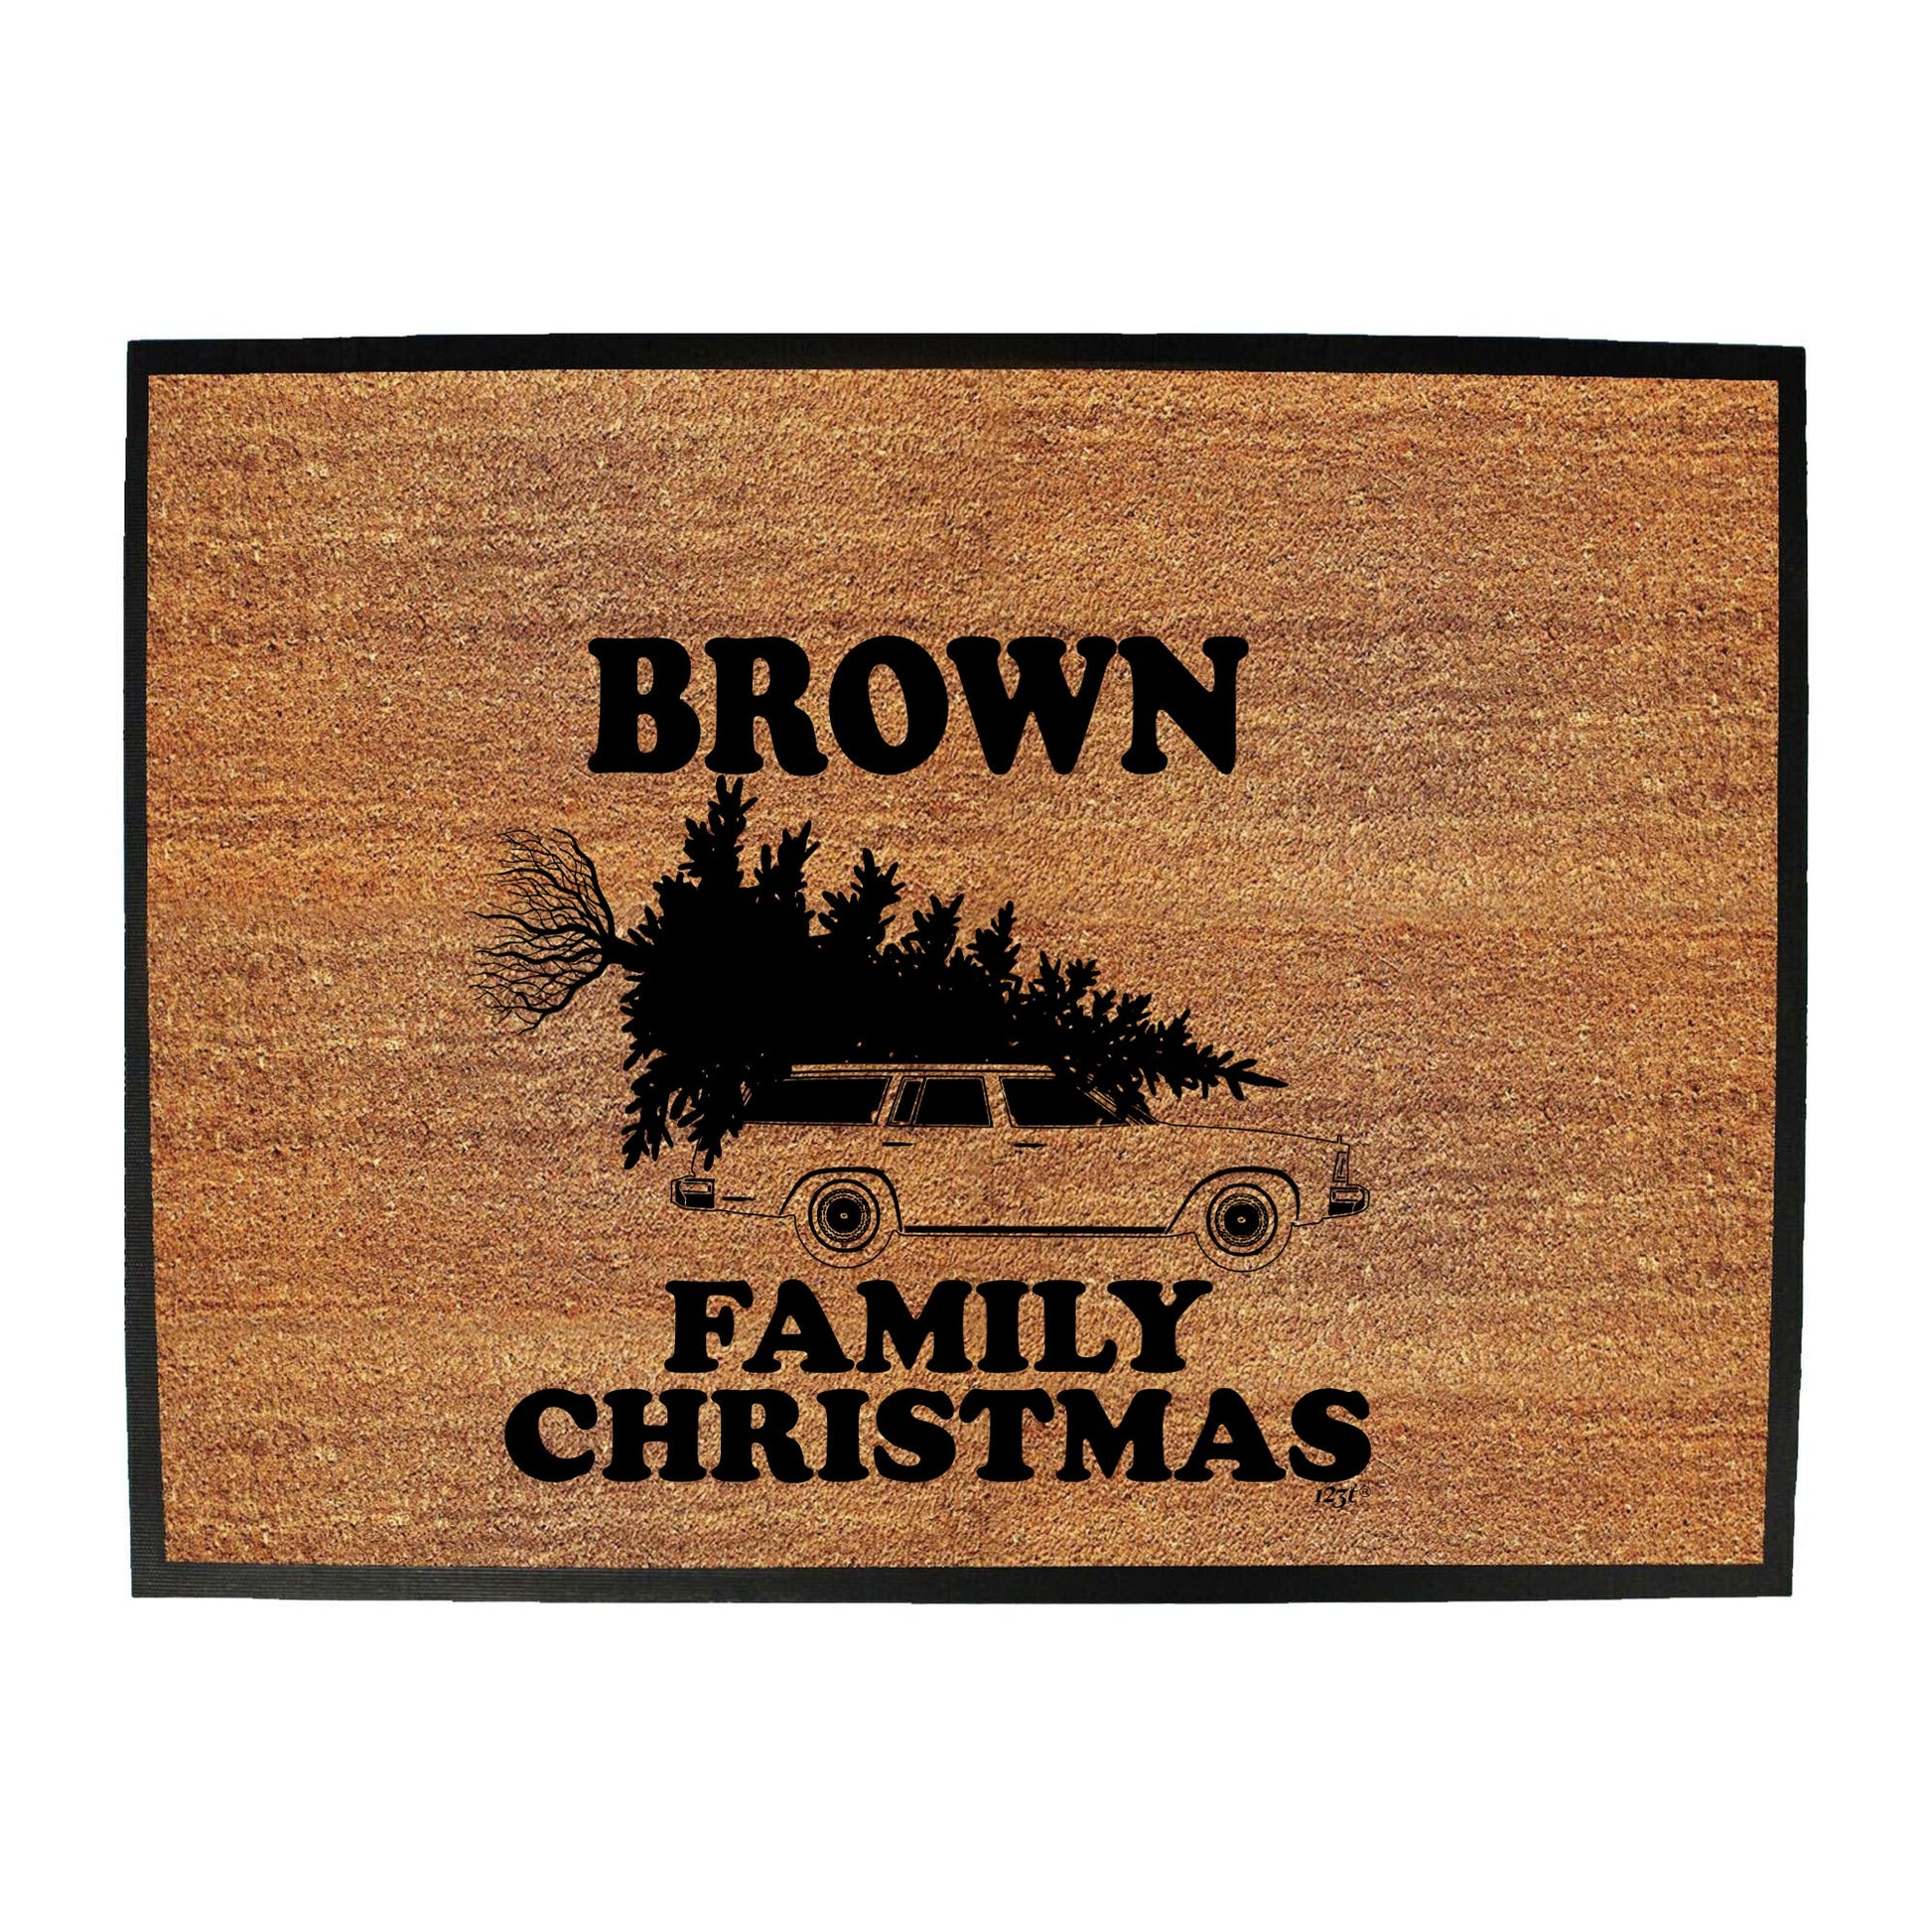 Family Christmas Brown - Funny Novelty Doormat